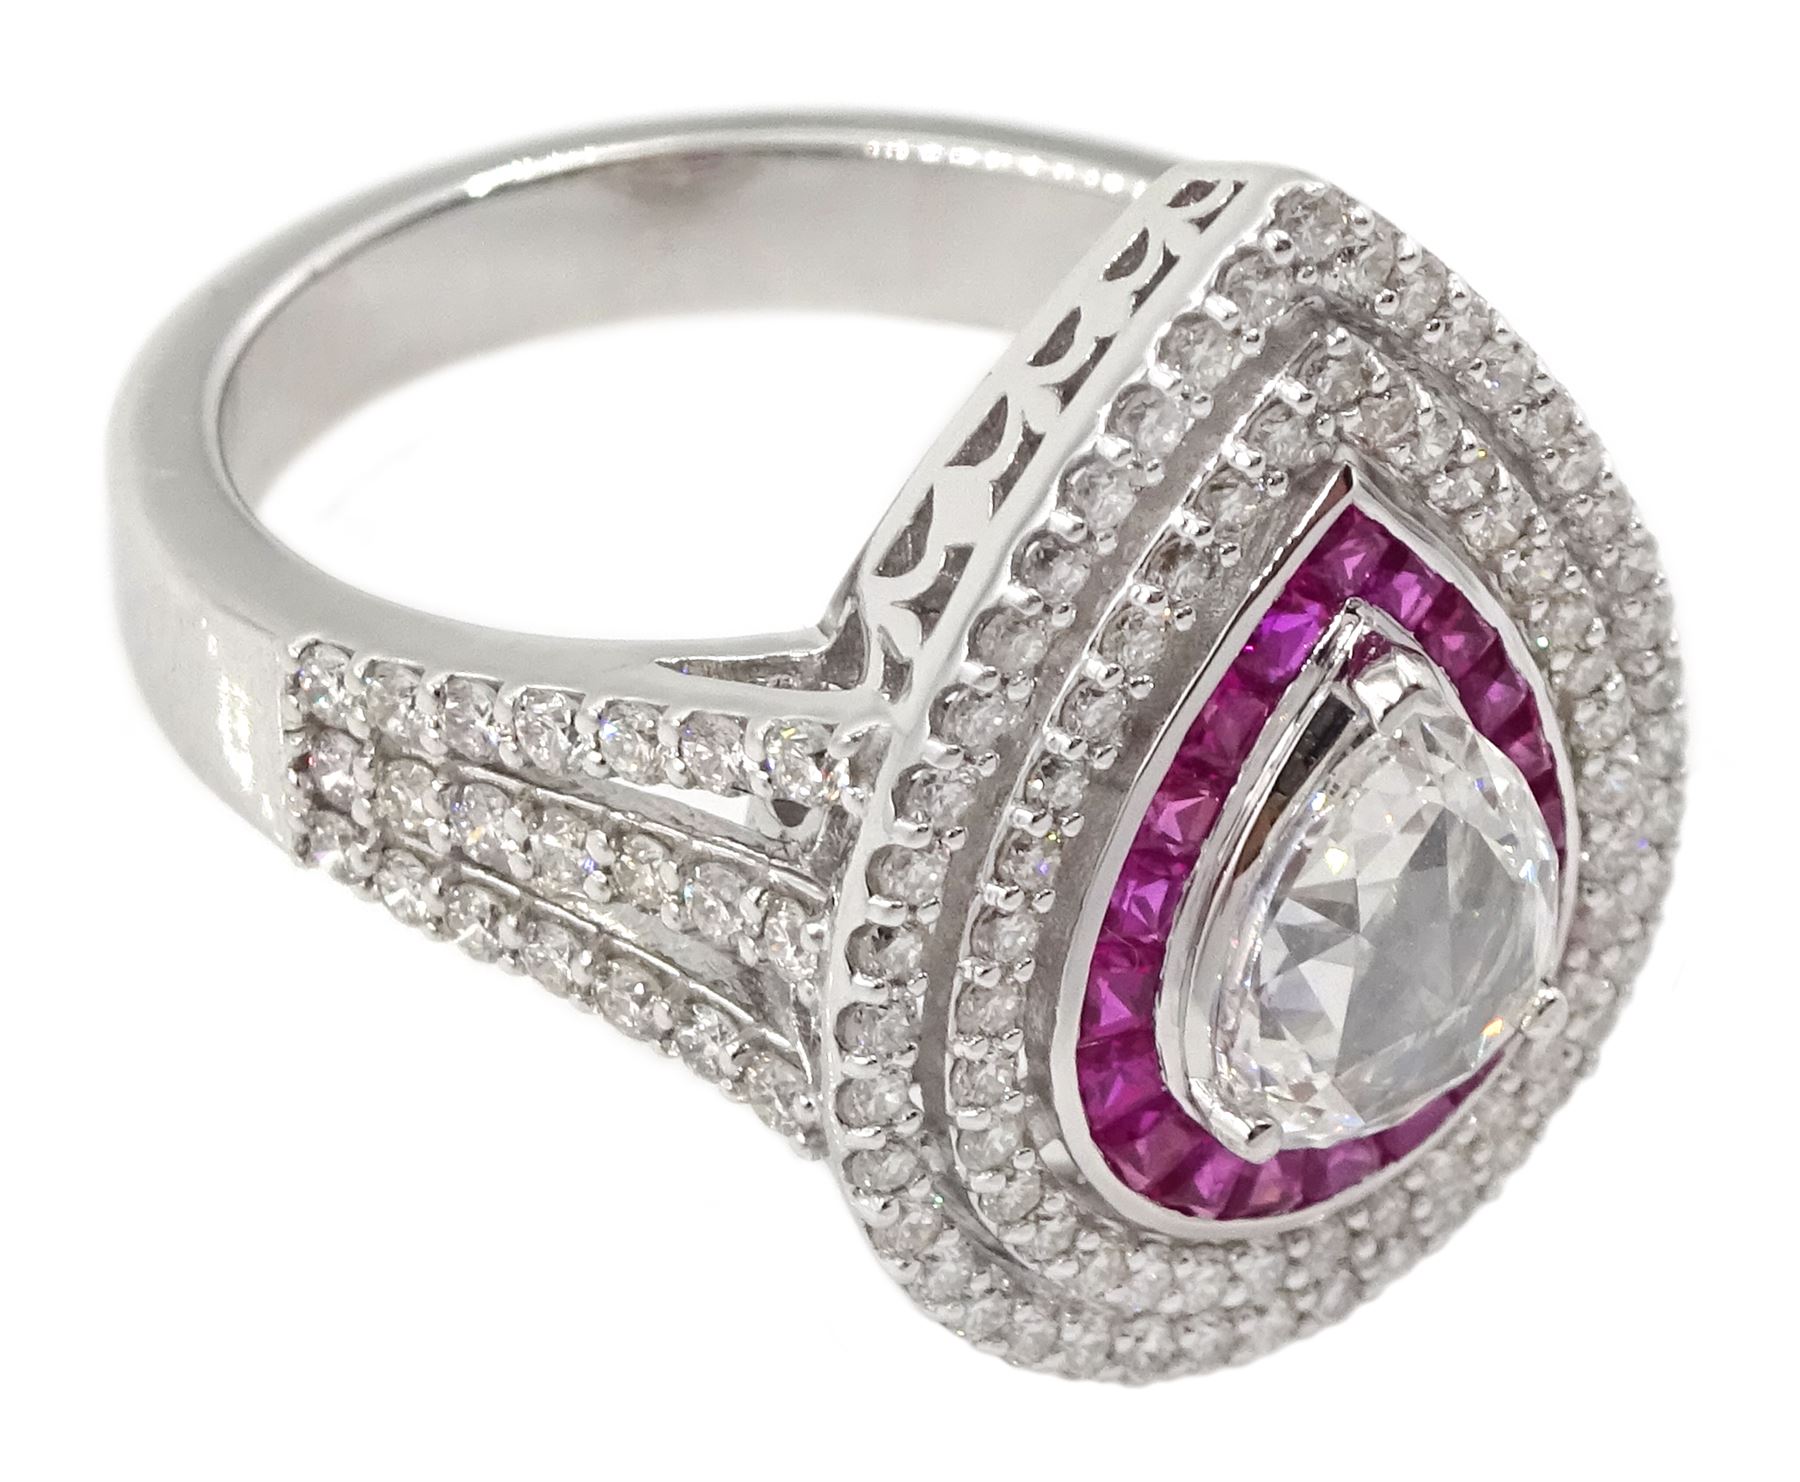 18ct white gold diamond and ruby pear shaped cluster ring - Image 3 of 4